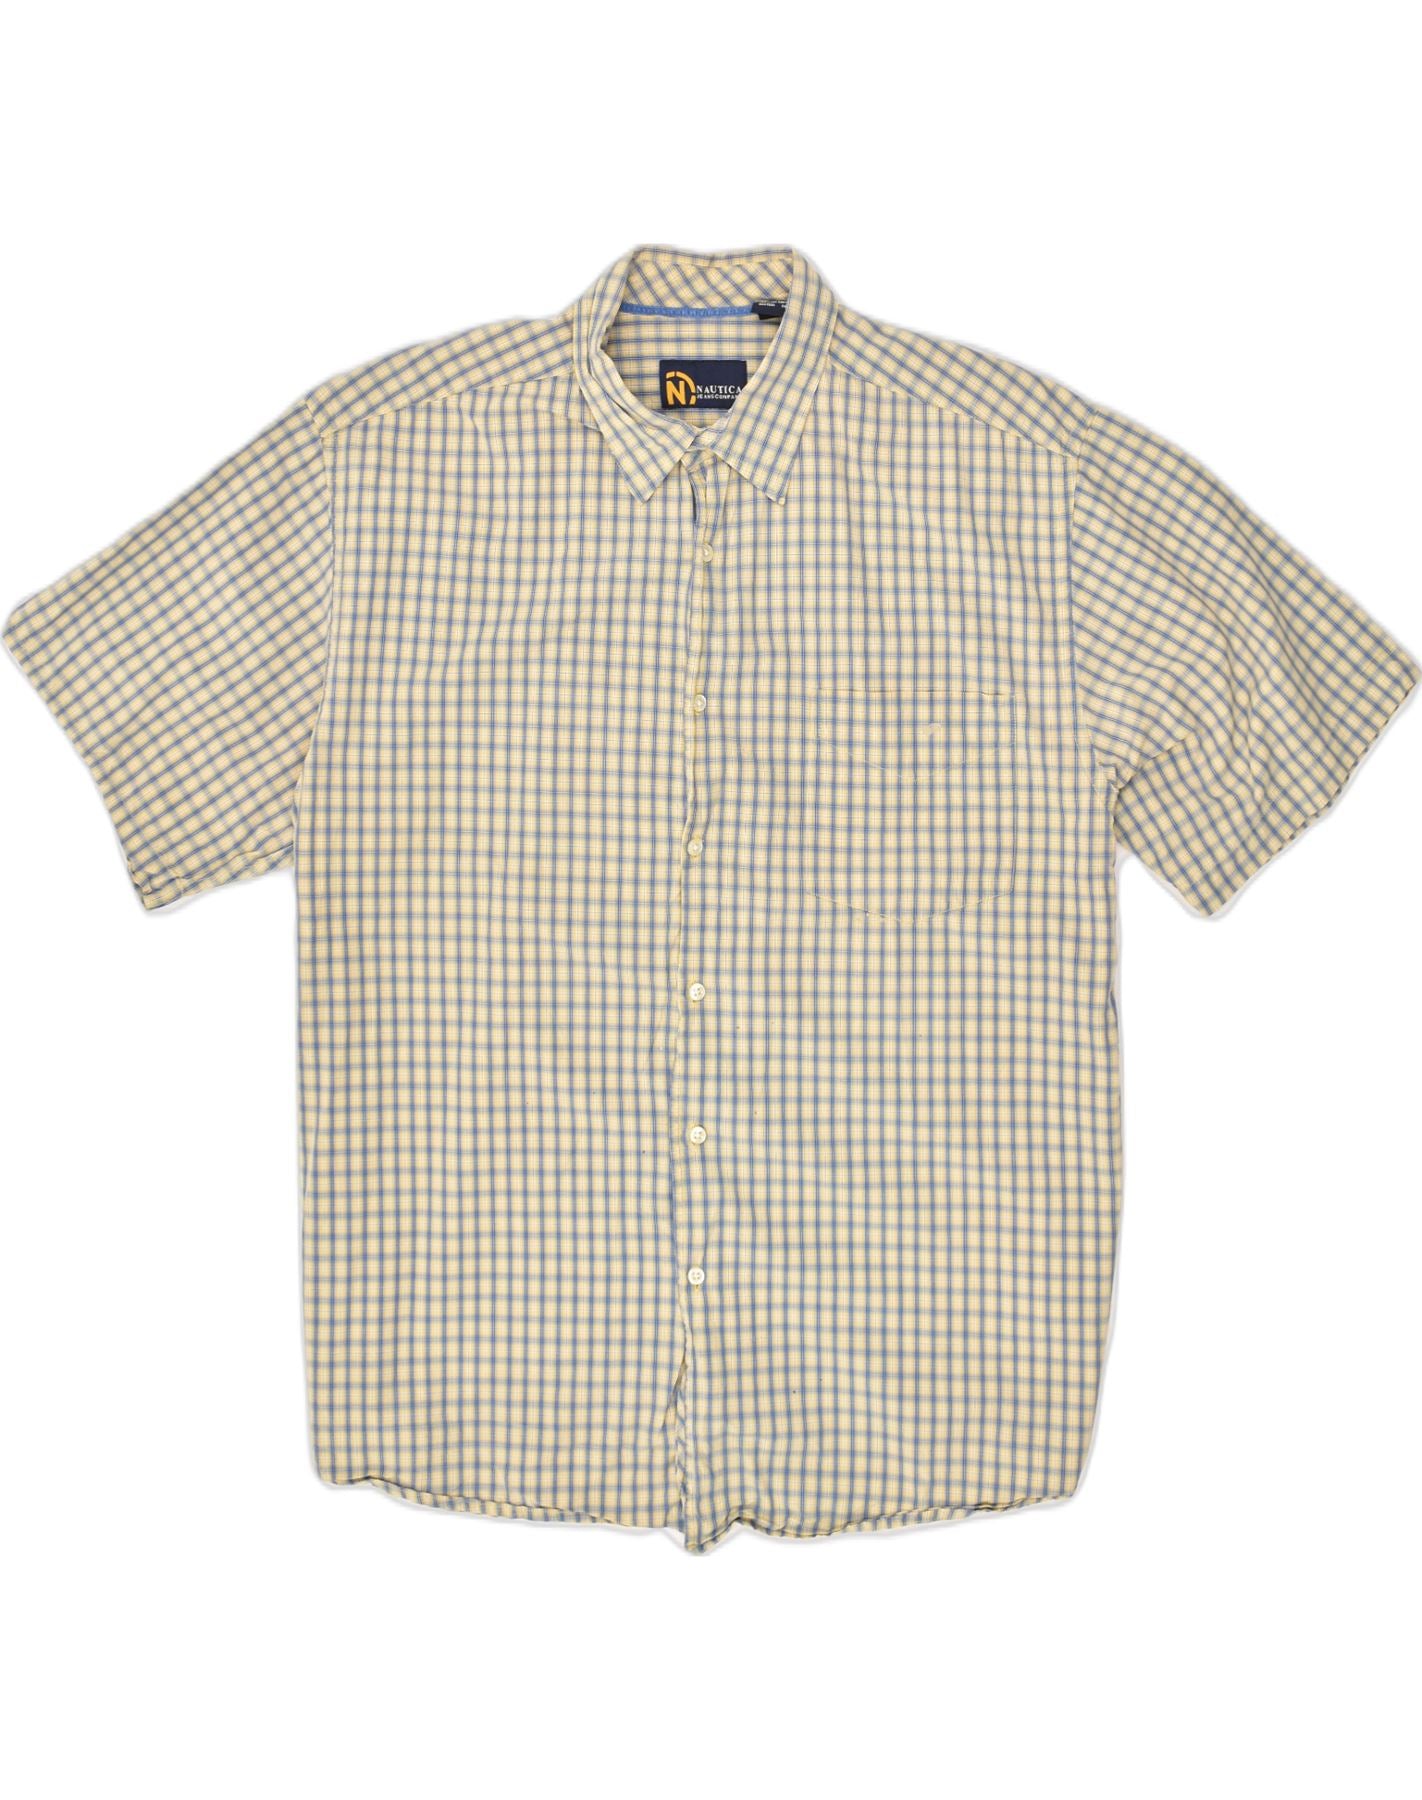 NAUTICA Mens Shirt Large Multicoloured Check Cotton, Vintage & Second-Hand  Clothing Online